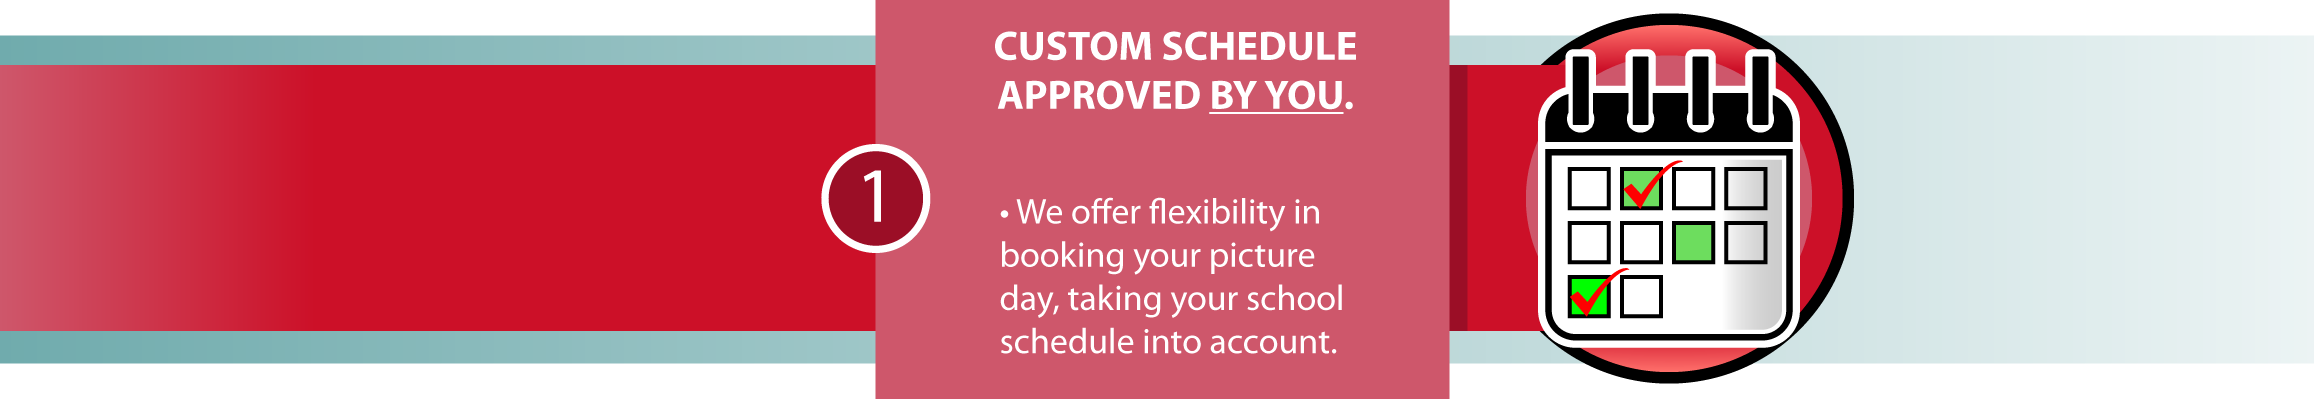 Custom schedule approved by you